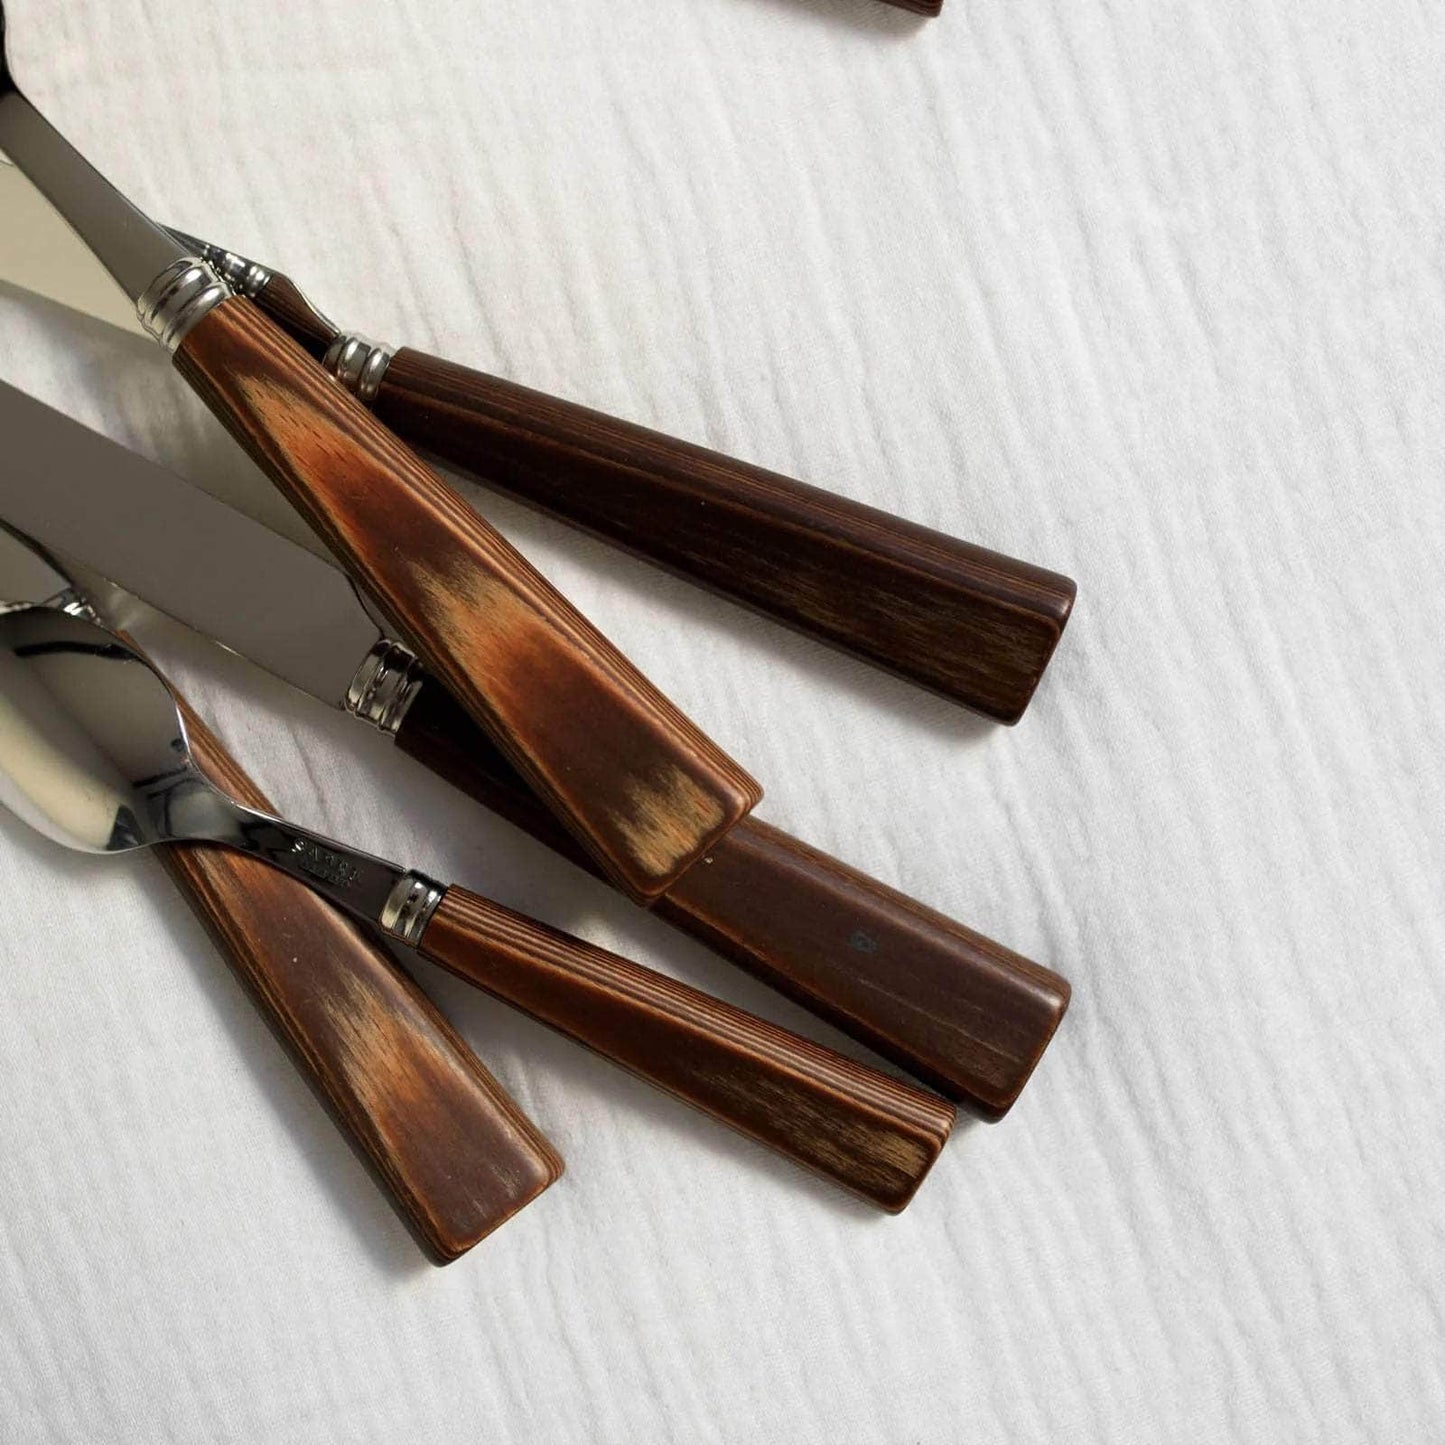 Nature 5Pc Cutlery Set | Brown